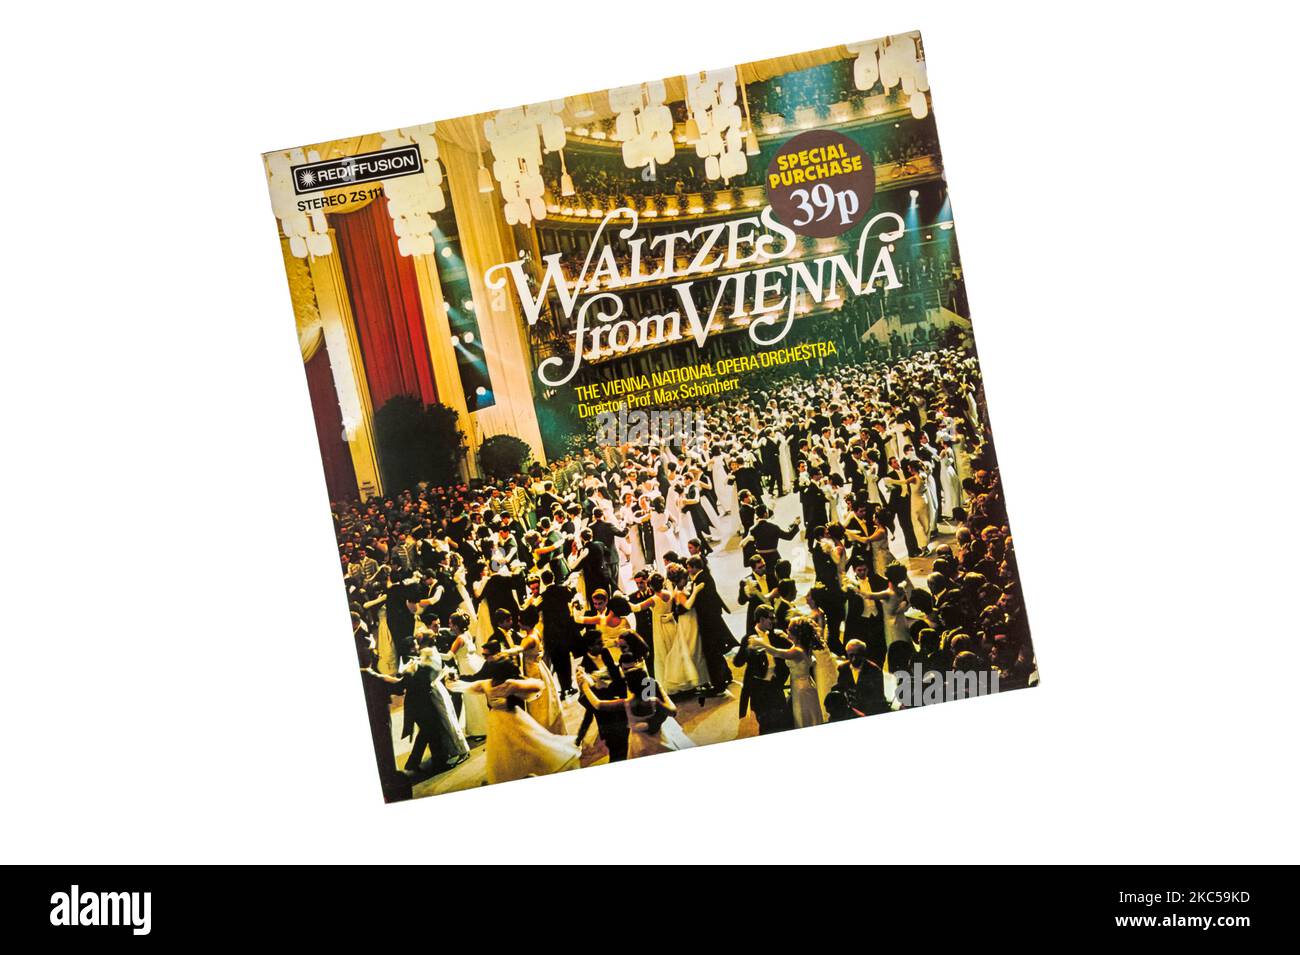 A 1972 budget record of Waltzes from Vienna by The Vienna National Opera Orchestra directed by Prof. Max Schönherr. With 39p Special Purchase sticker. Stock Photo